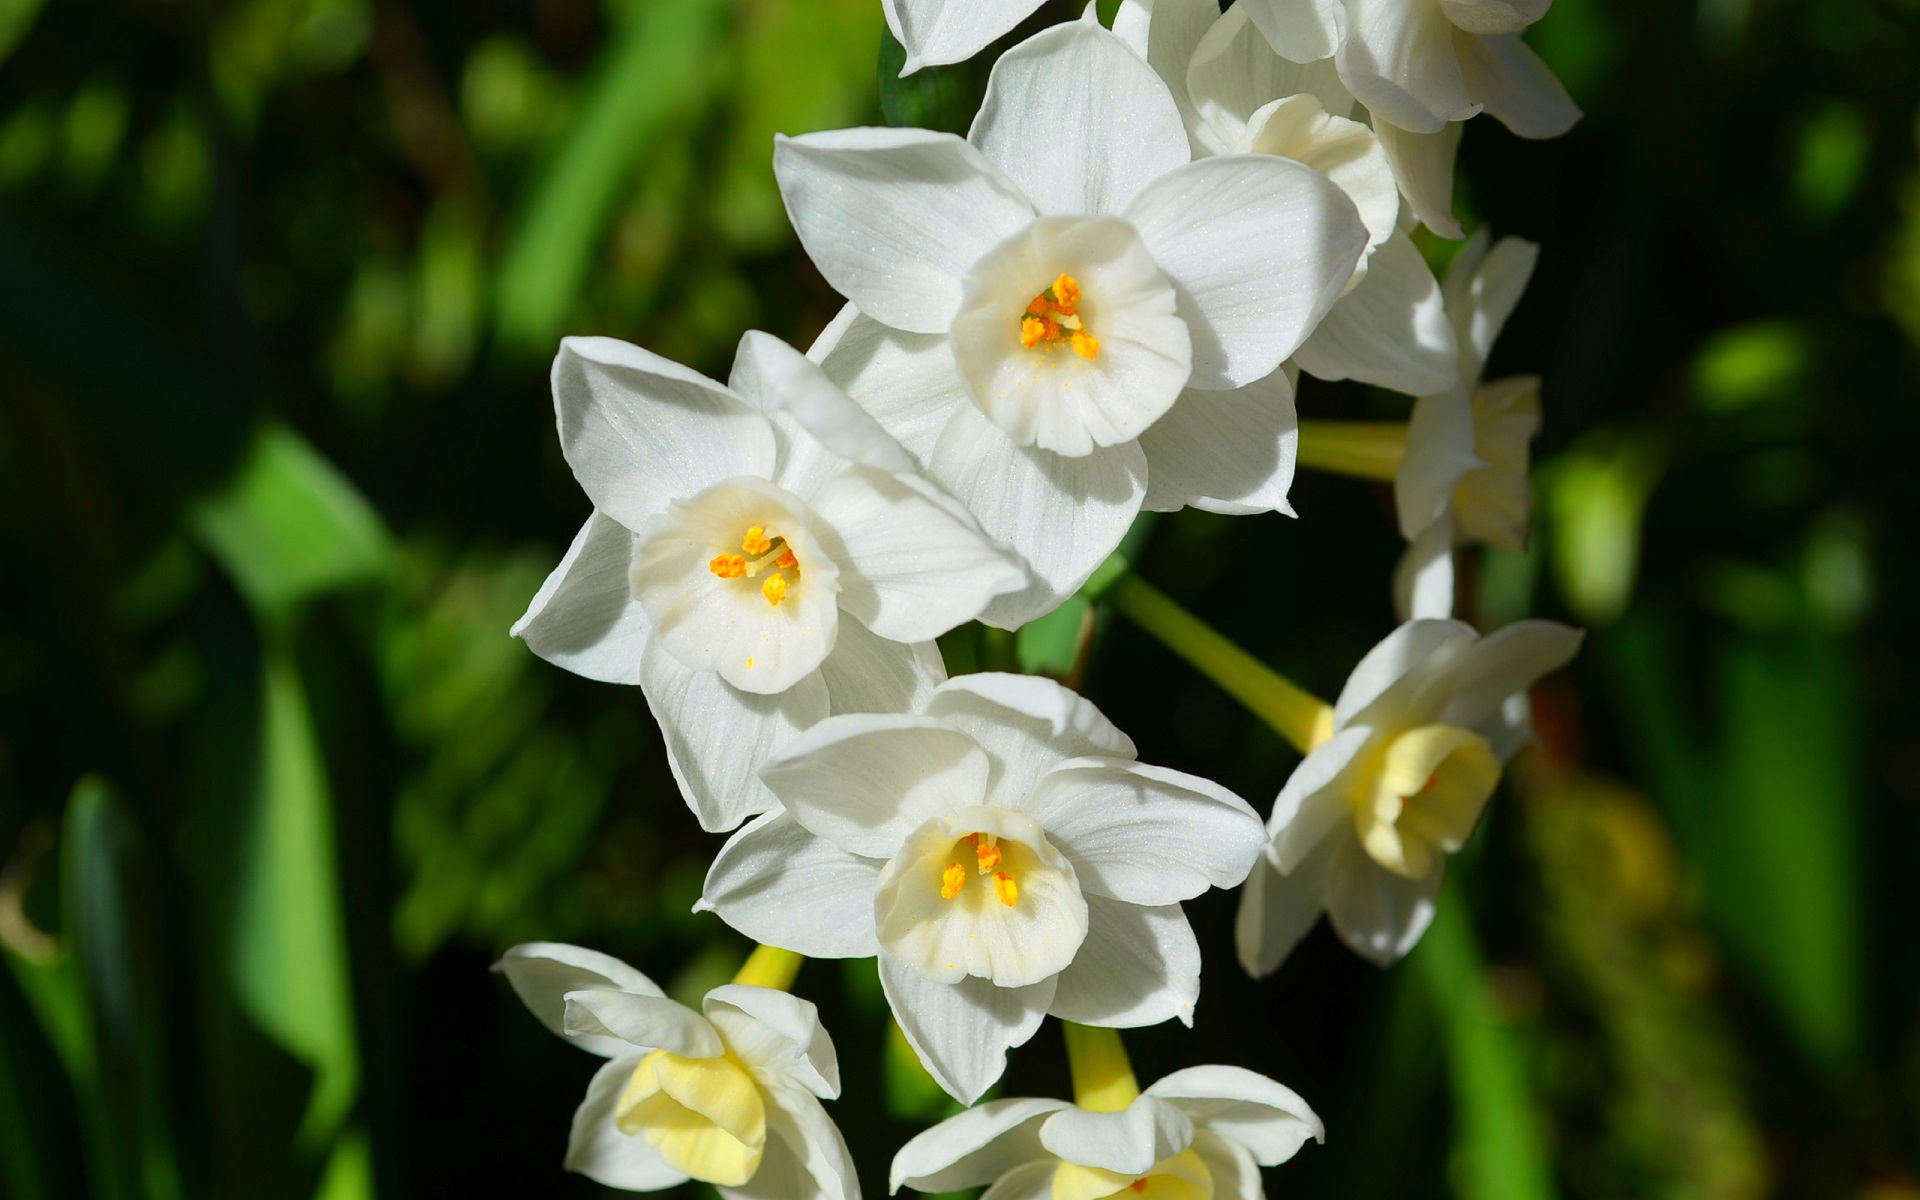 earth, daffodil, blur, close up, flower, narcissus, nature, paperwhite narcissus, white flower, white, flowers